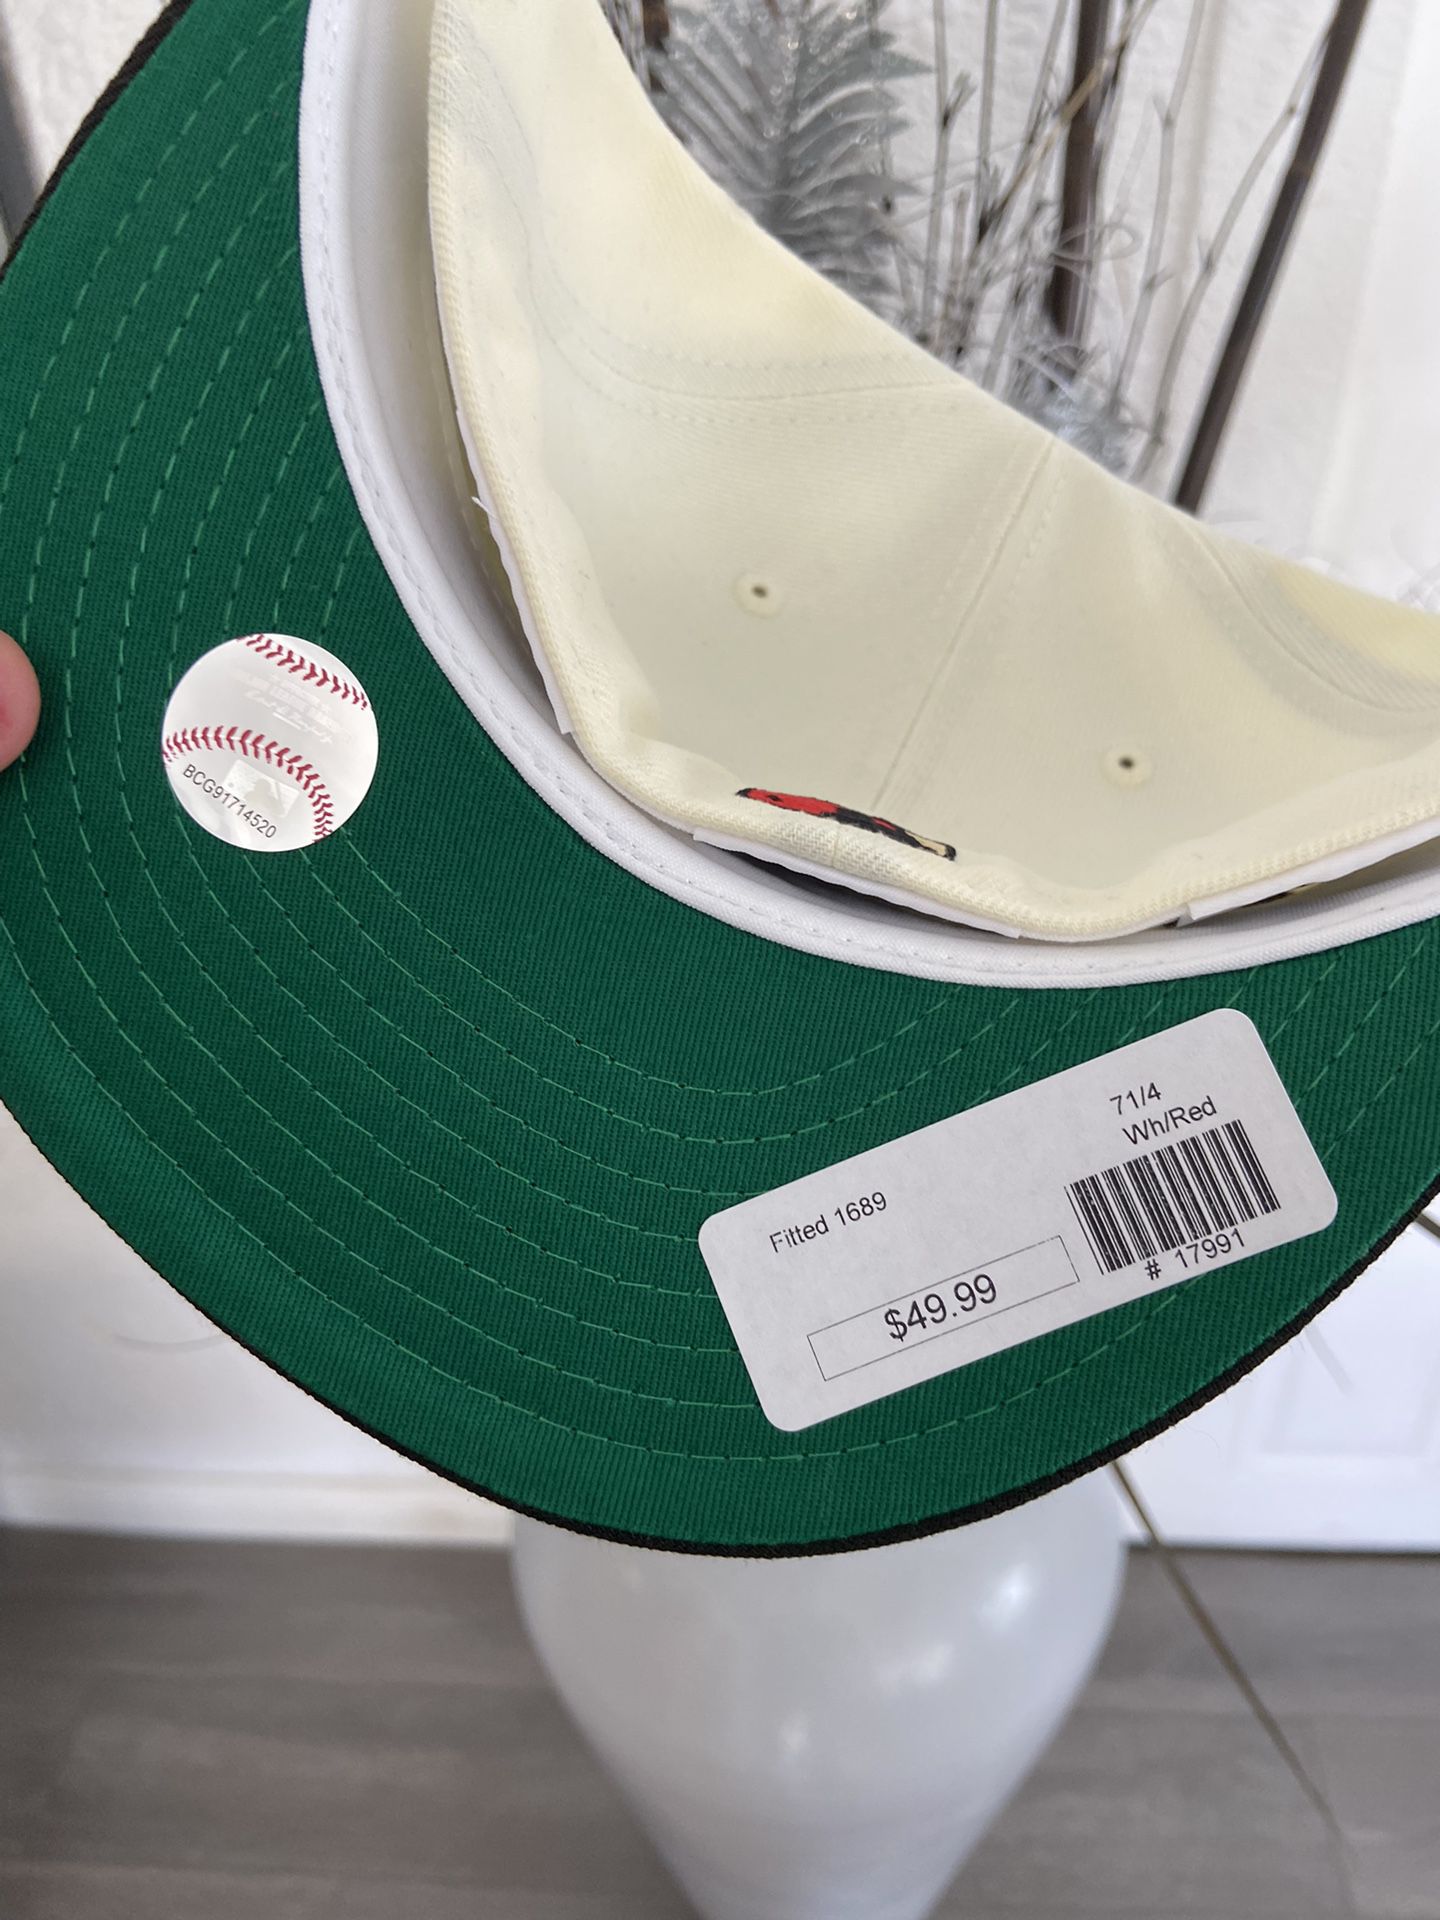 San Diego Padres Twins Enterprise Camo Hat Strapback Adjustable for Sale in  San Diego, CA - OfferUp